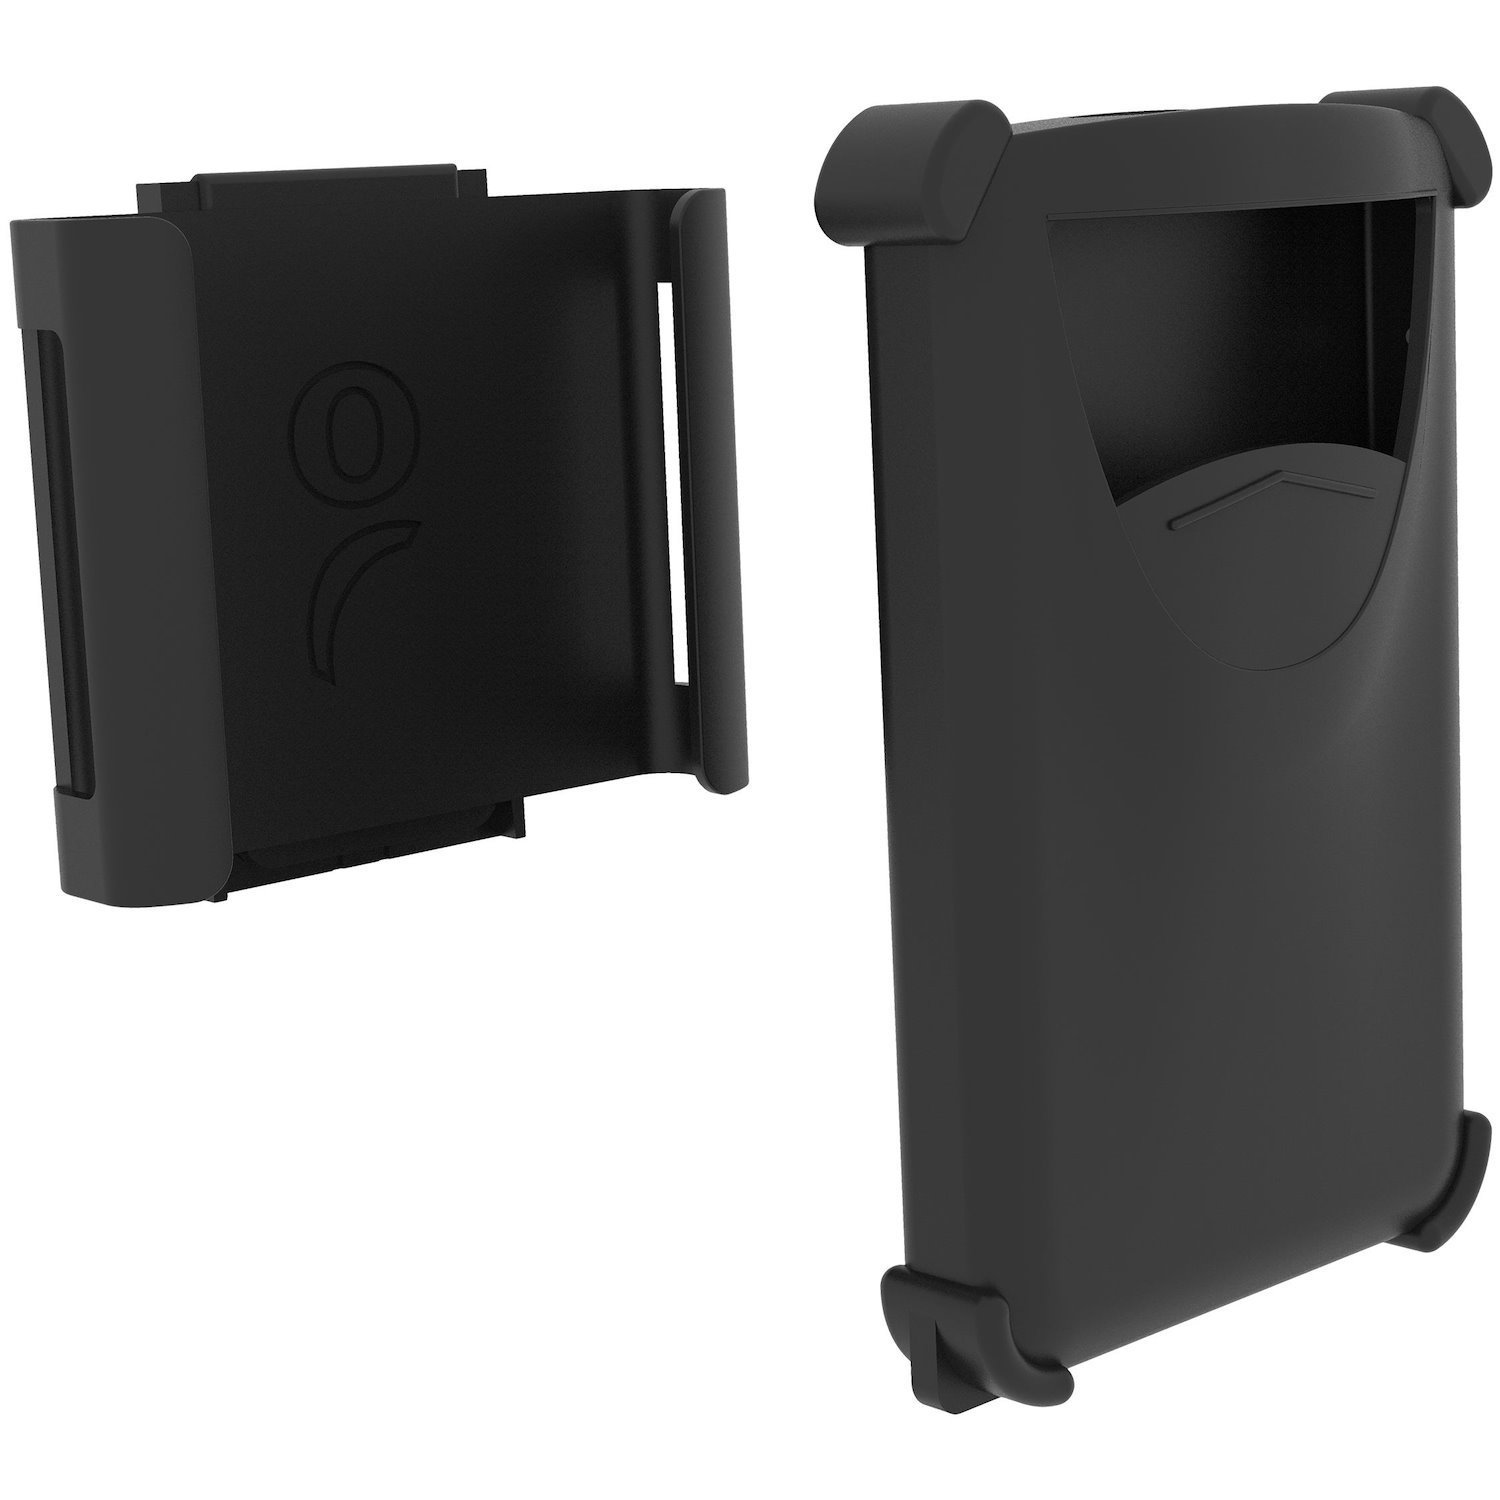 Socket Mobile Ac4201-2418 Barcode Reader Accessory Holder (Mobile Ac4201-2418 Barcode - Reader Accessory Holder - Mobile Ac4201-2418 Holder Black Socket Mobile S800 1 PC[S] - Warranty: 12M)